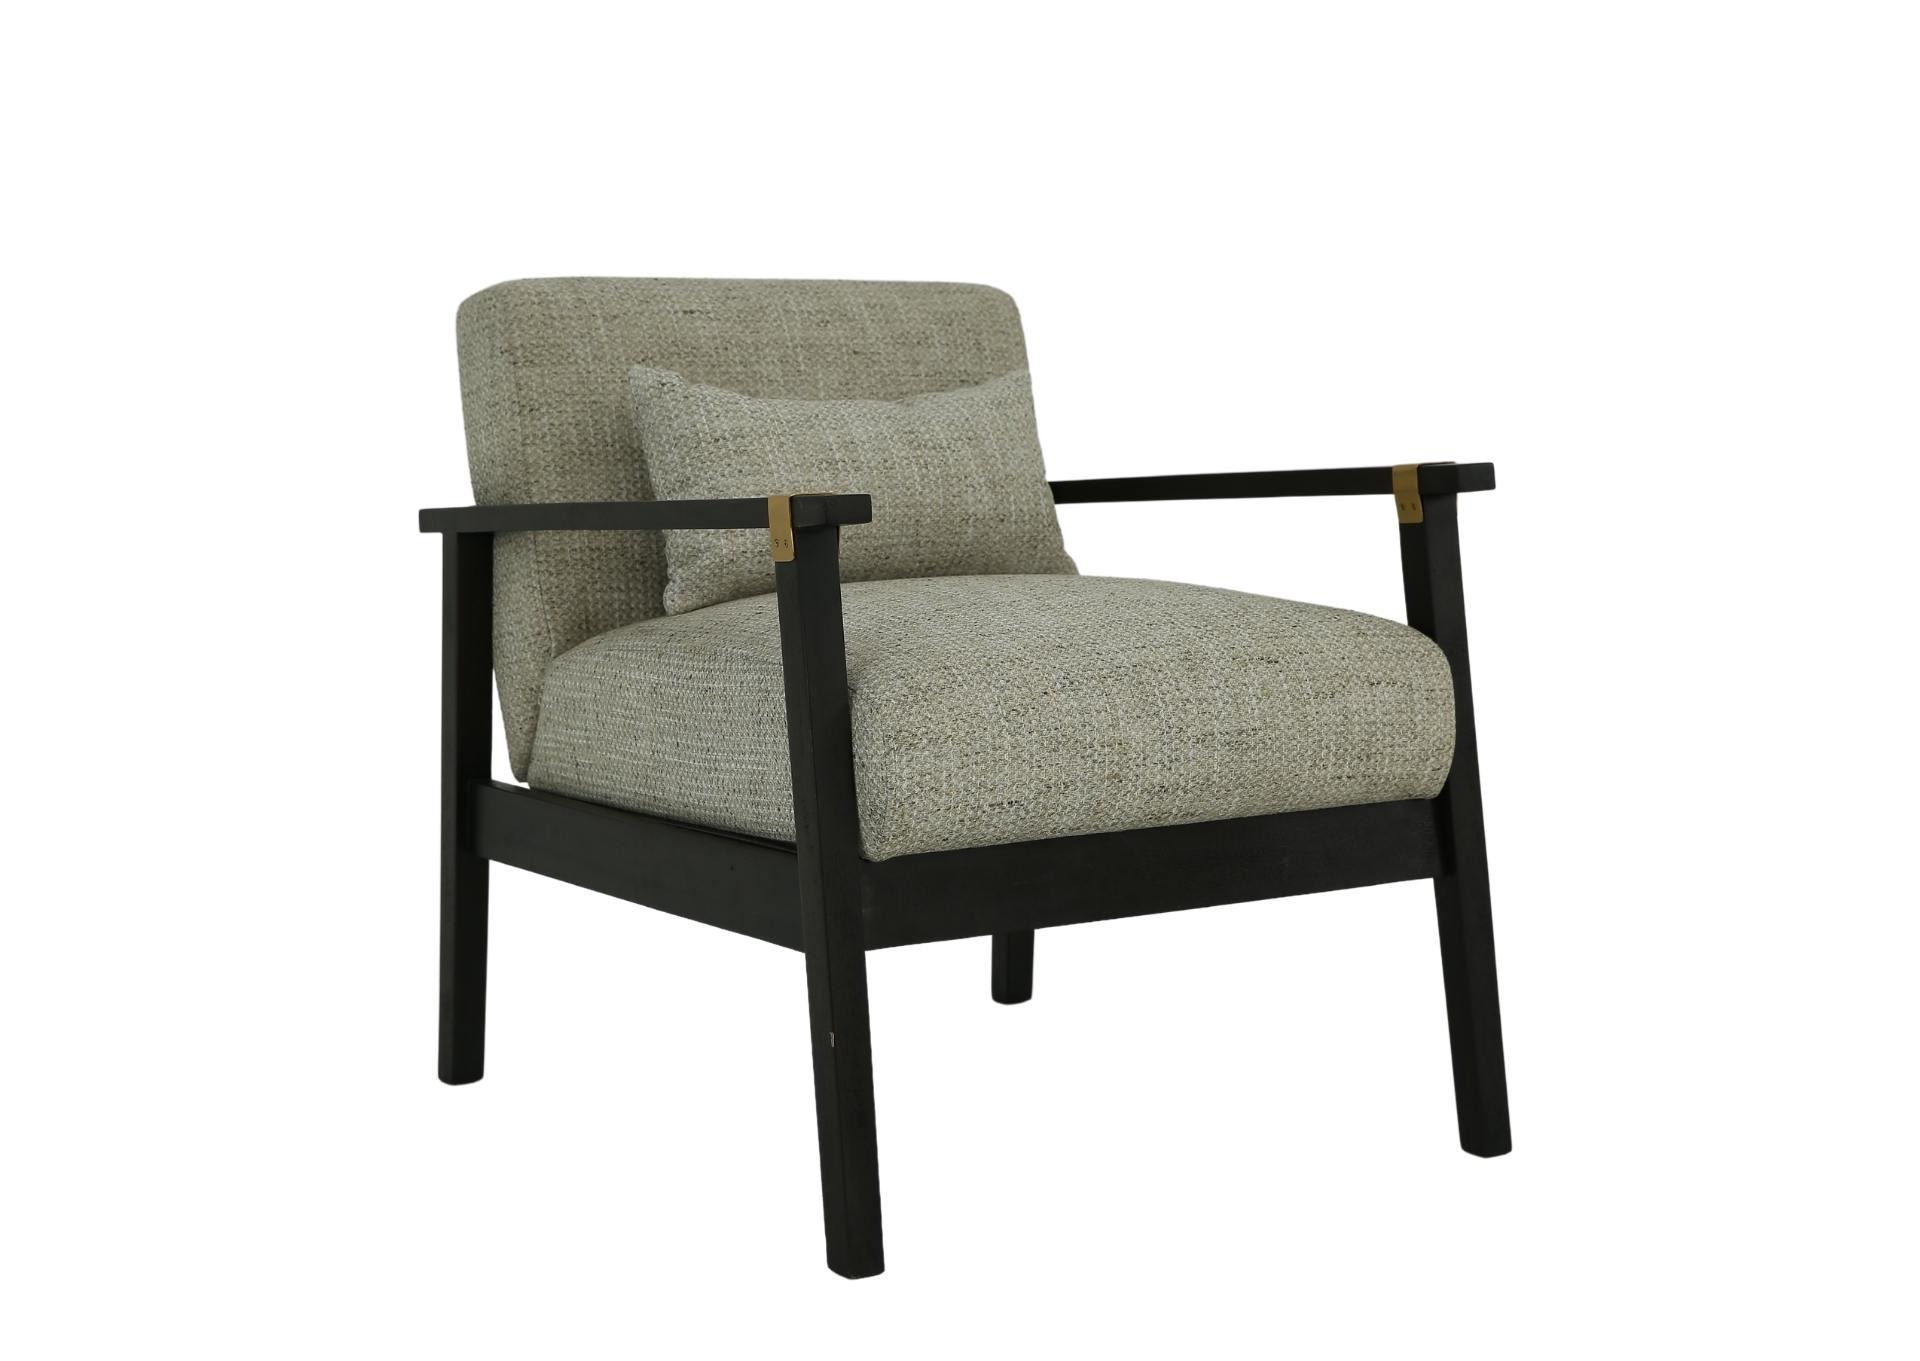 BALINTMORE CEMENT ACCENT CHAIR,ASHLEY FURNITURE INC.